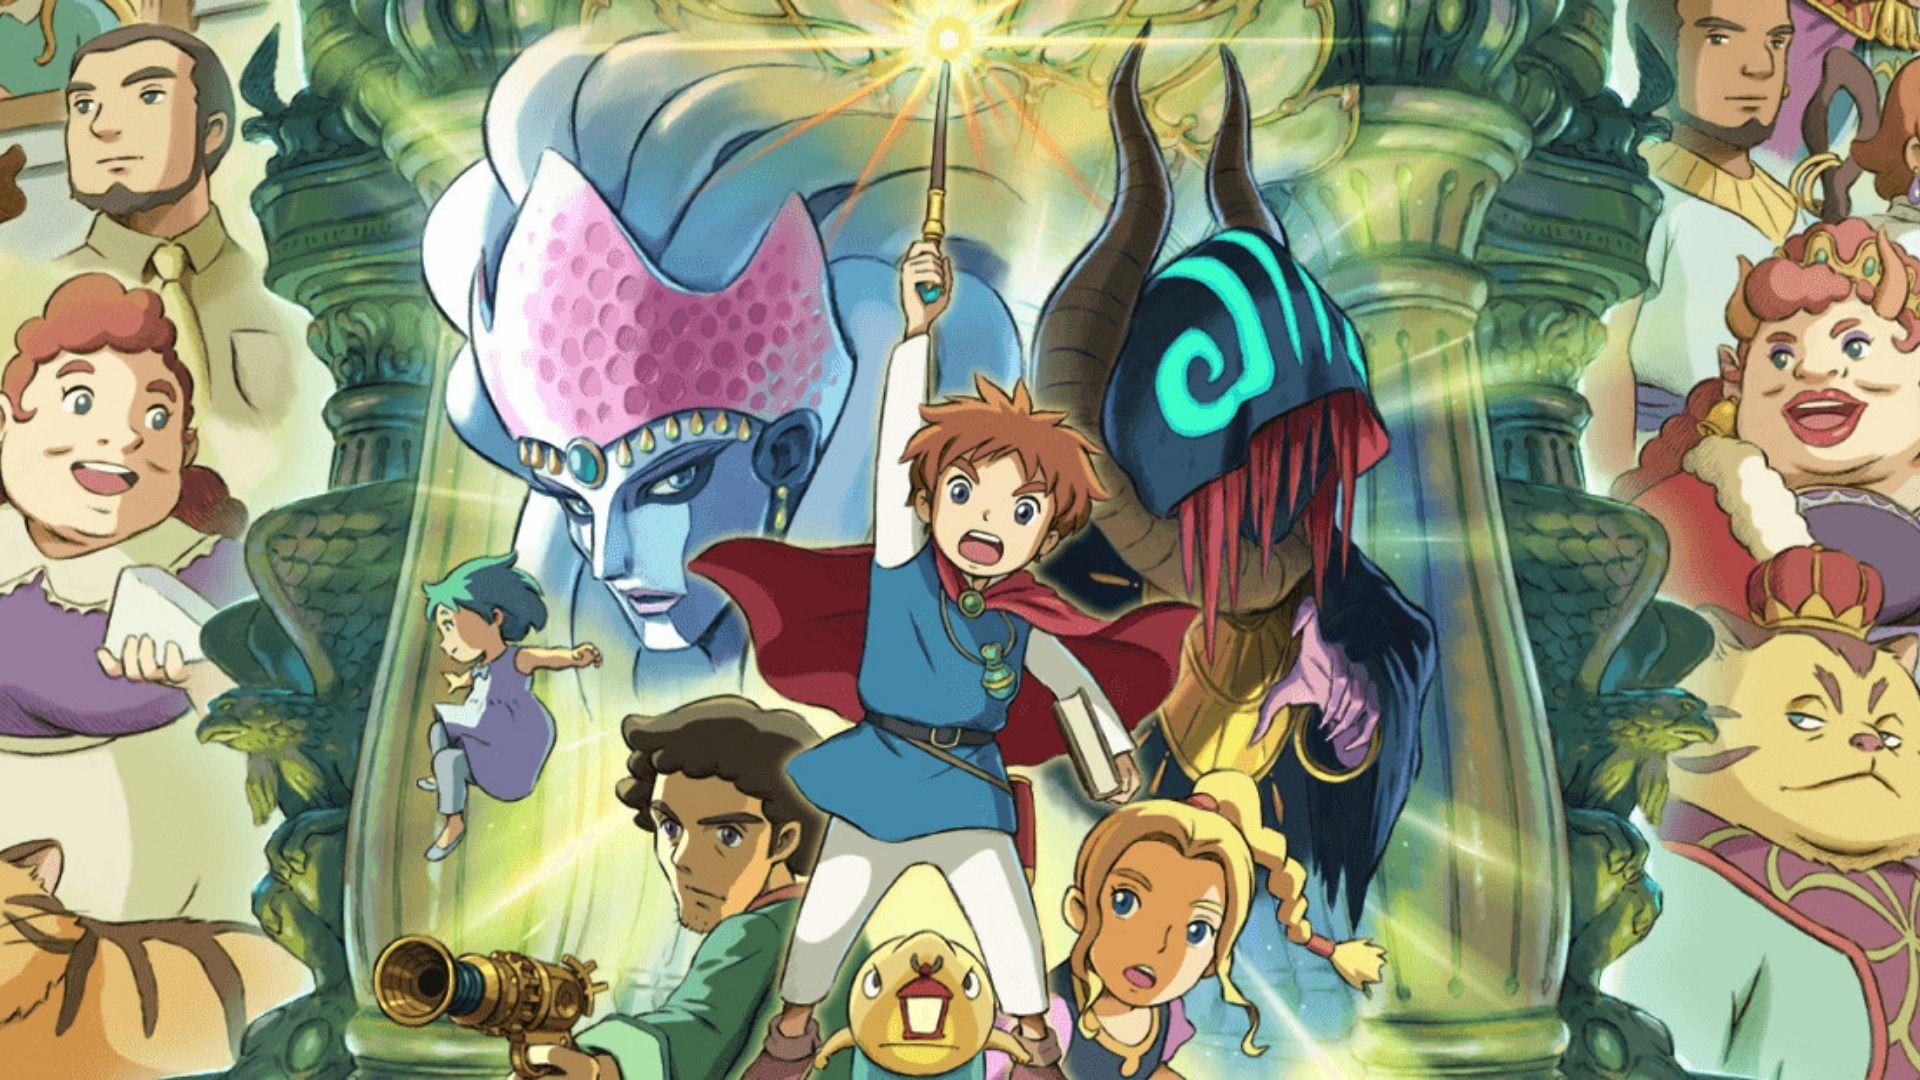 Art from the game Ni No Kuni, a game like Pokémon, featuring a character raising a sword as various characters surround him.